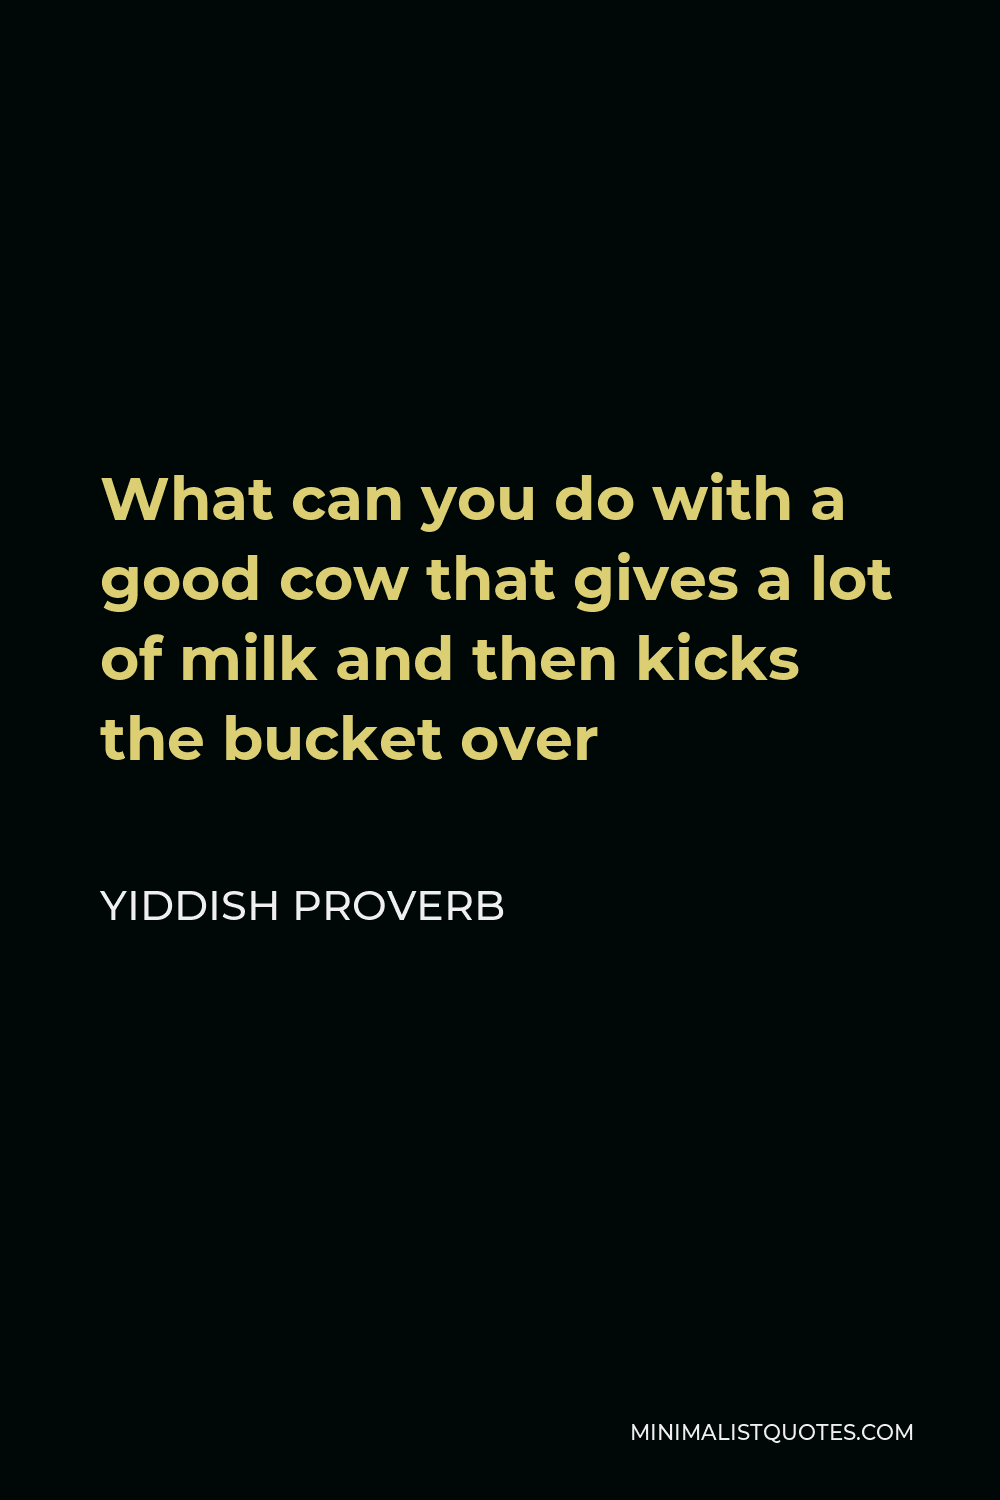 Yiddish Proverb Quote - What can you do with a good cow that gives a lot of milk and then kicks the bucket over